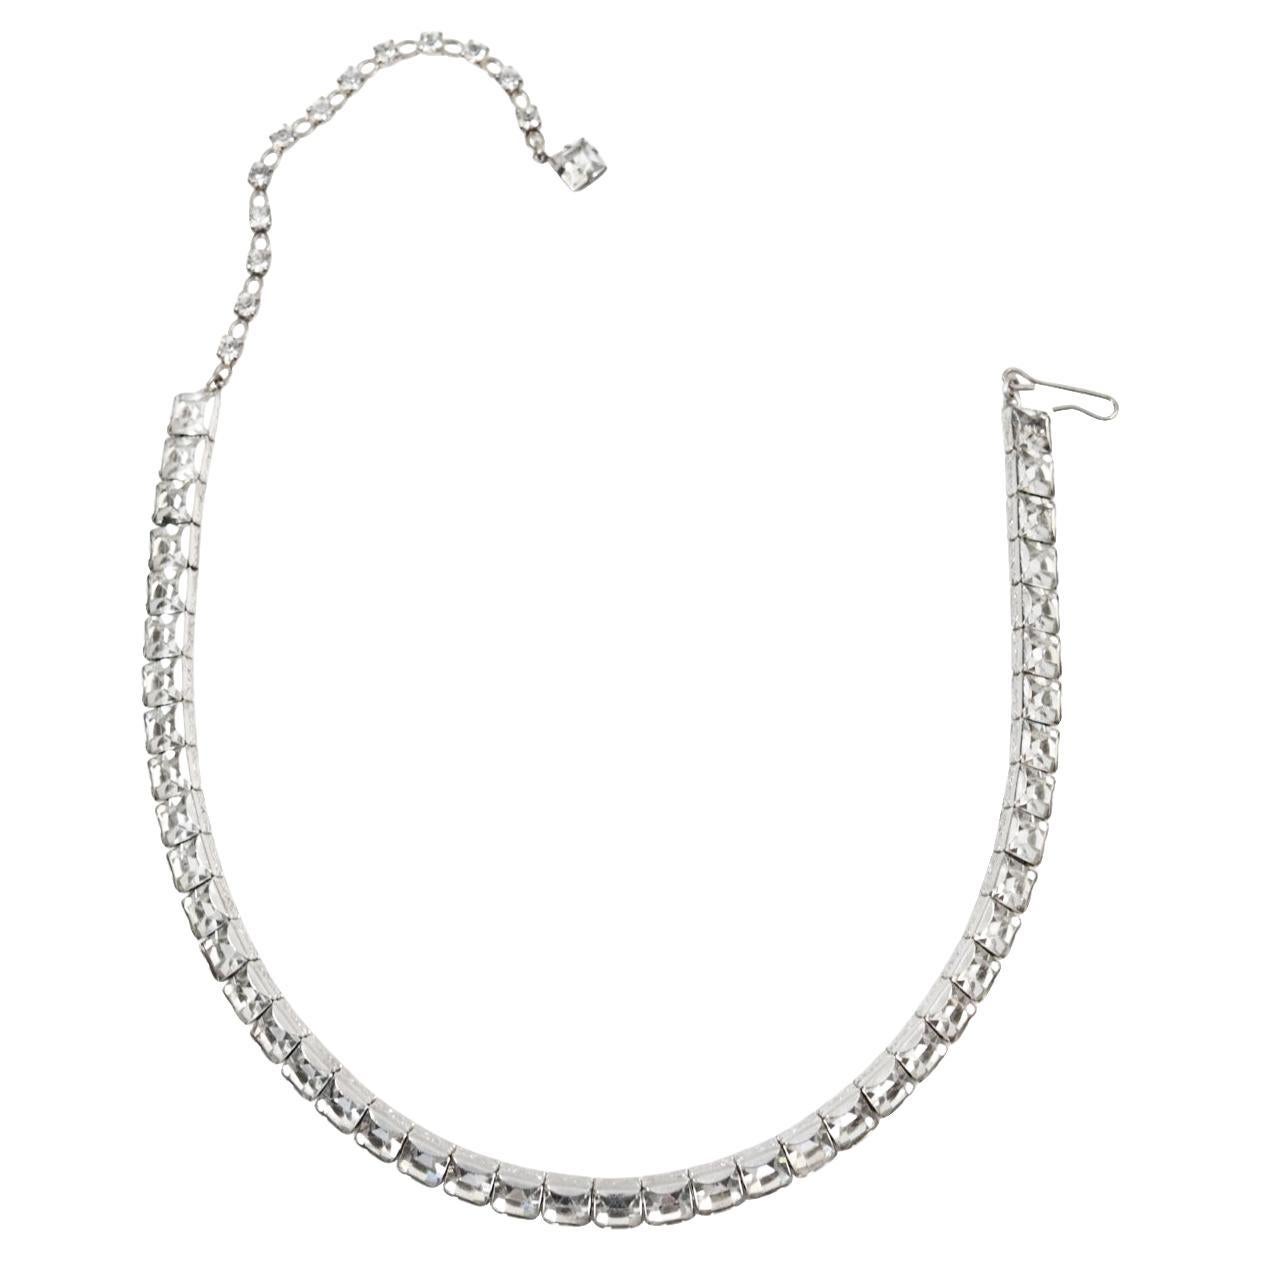 Vintage Weiss Silver Tone Channel Set Diamante Choker Circa 1960's. This is a design since the beginning of time that will always be in style. It is minimal but chic and says it all.  I sold so many of these at Barneys New York. Women would buy